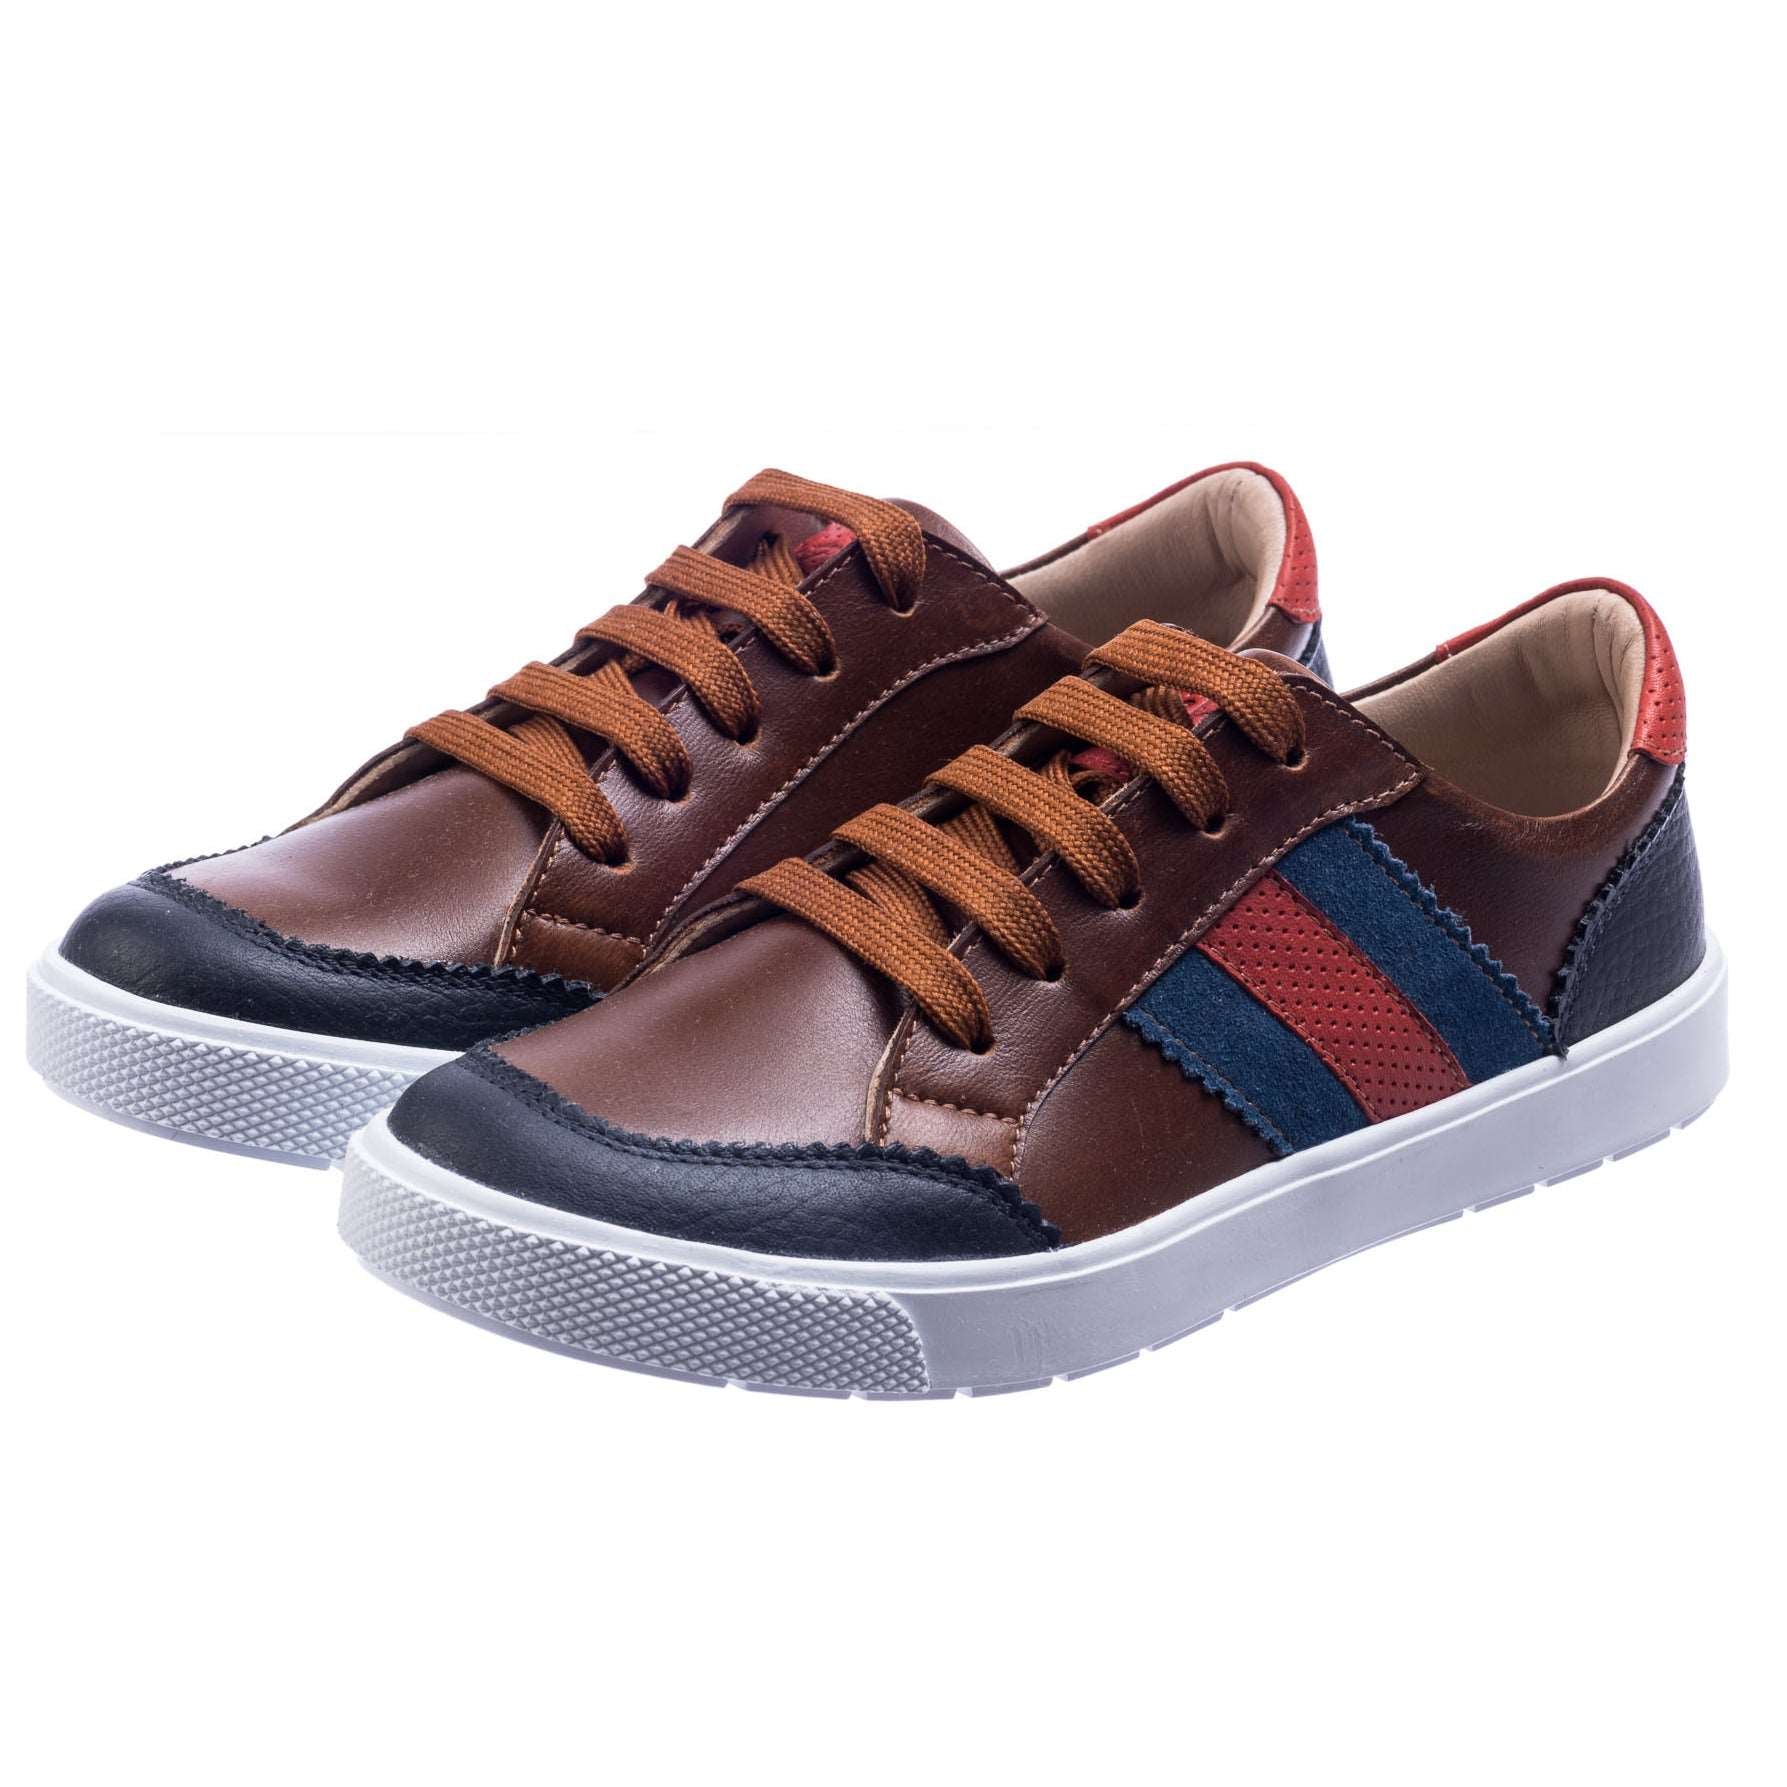 Perfect Americas Cup Designer Sneakers Shoes Patent Leather And Nylon  Sports Luxury Mens Skateboard Runner Casual Outdoor Walking Hiking Shoe B25  B22 With Box From Wholesaleshoes168, $58.04 | DHgate.Com